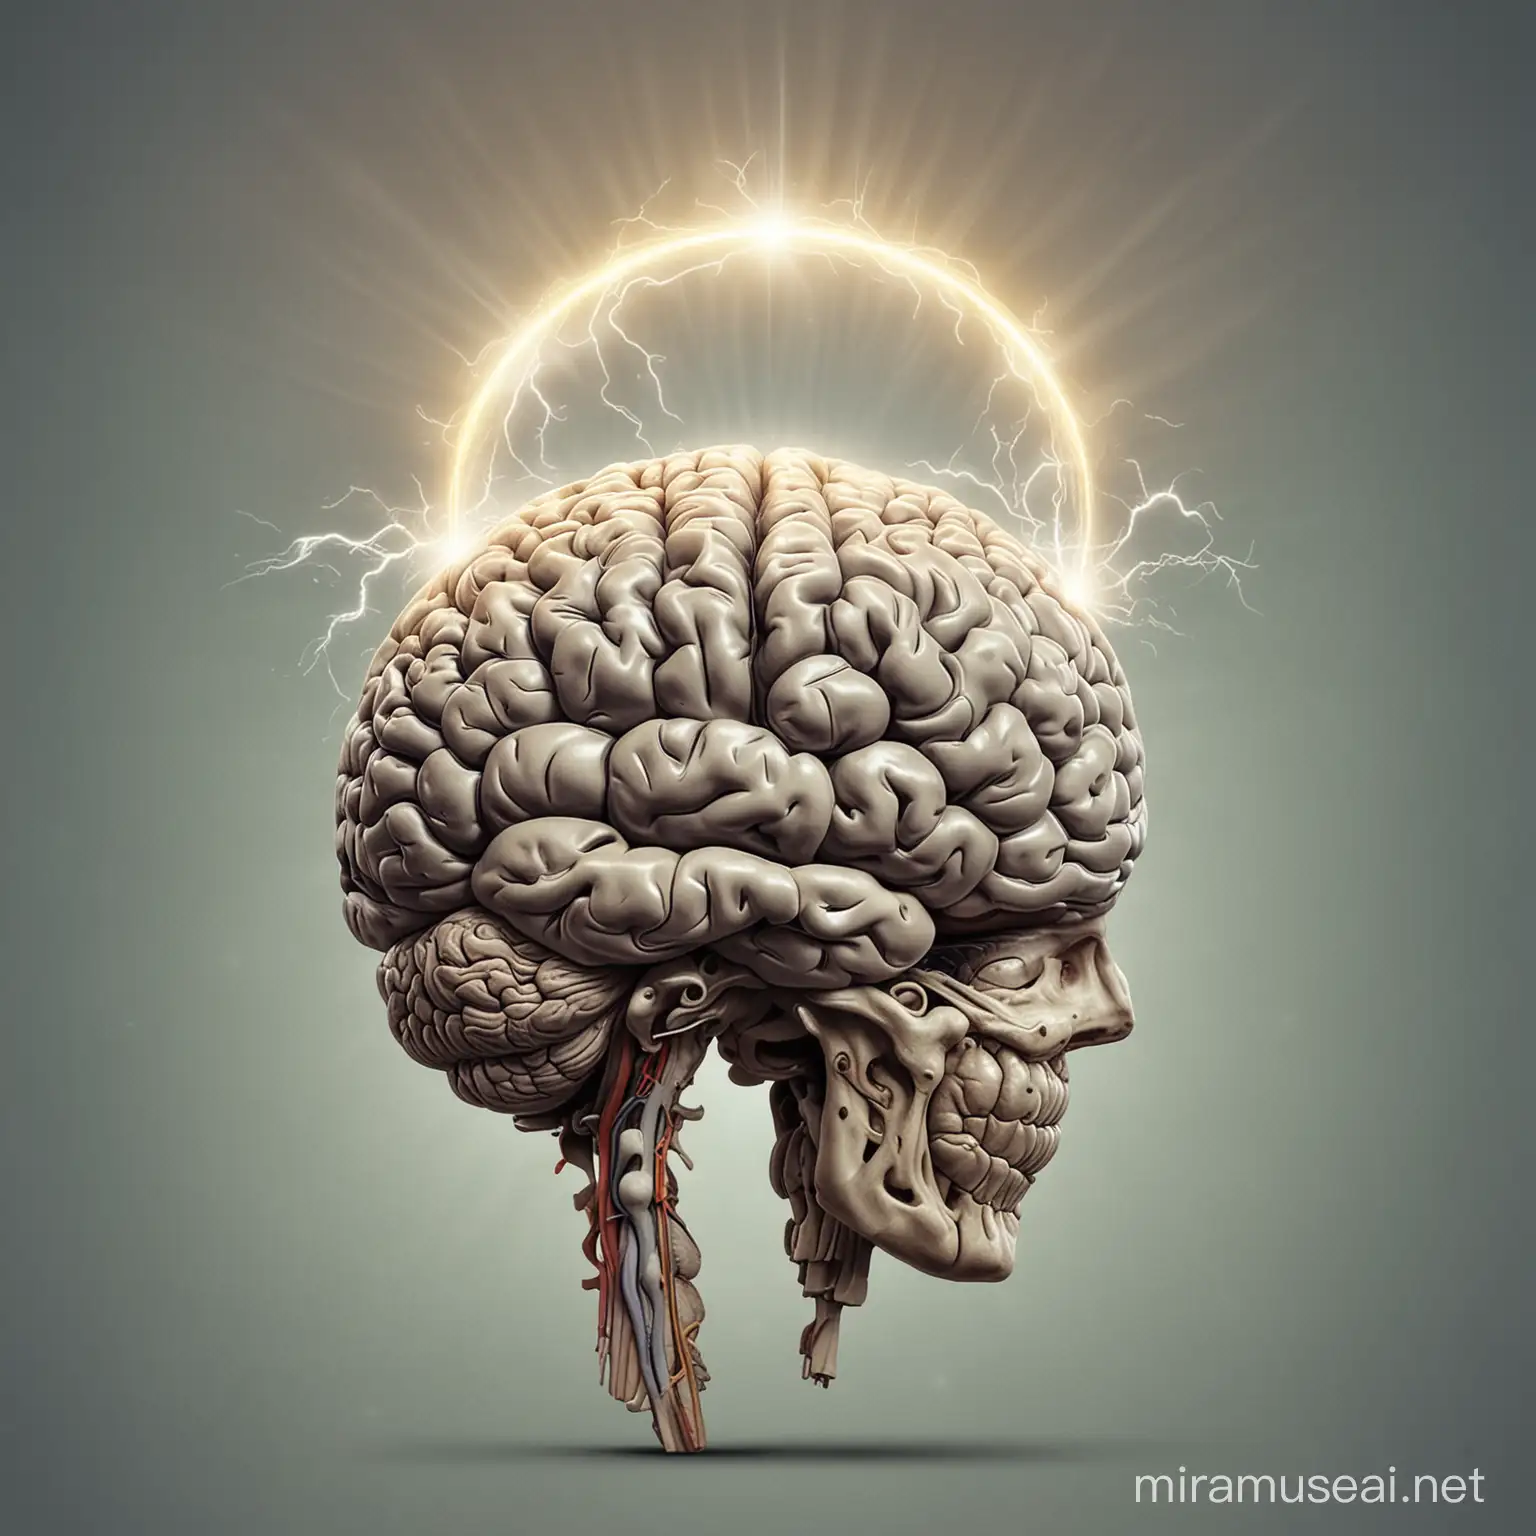 Enlightened Brain A Halo of Knowledge and Wisdom